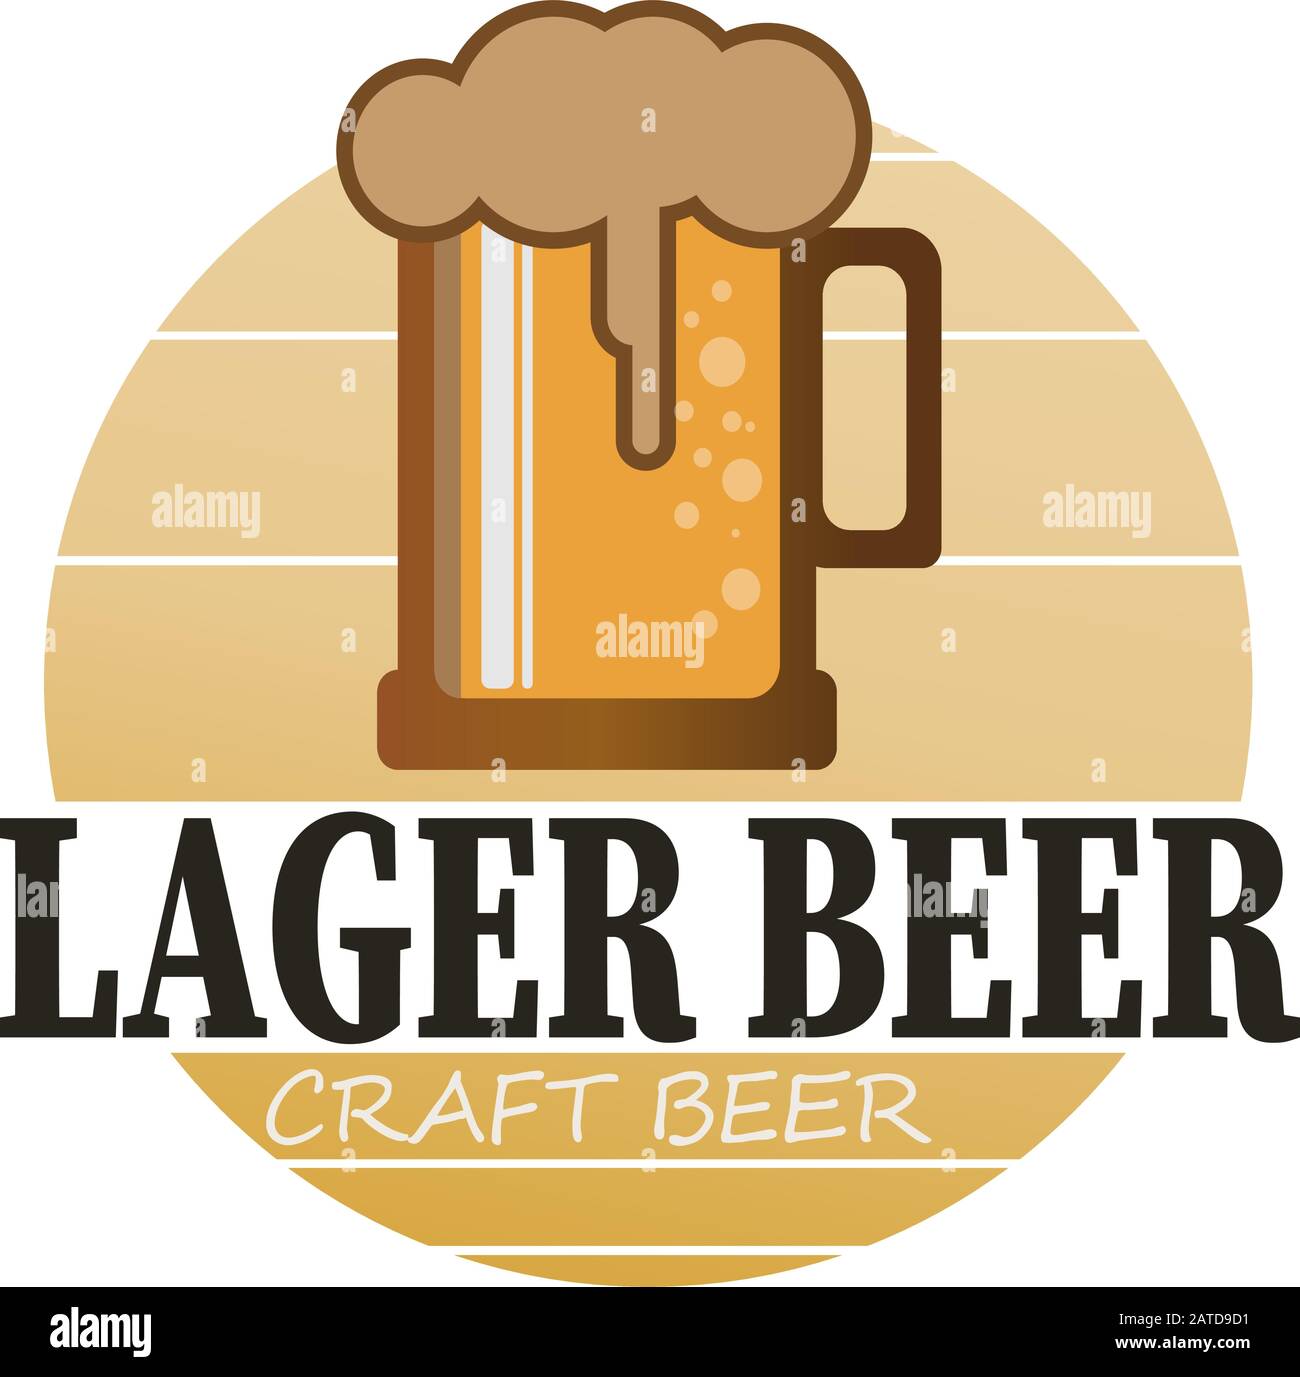 Vector Lager Beer Craft Beer vintage brewing company logo isolated on white background Stock Vector